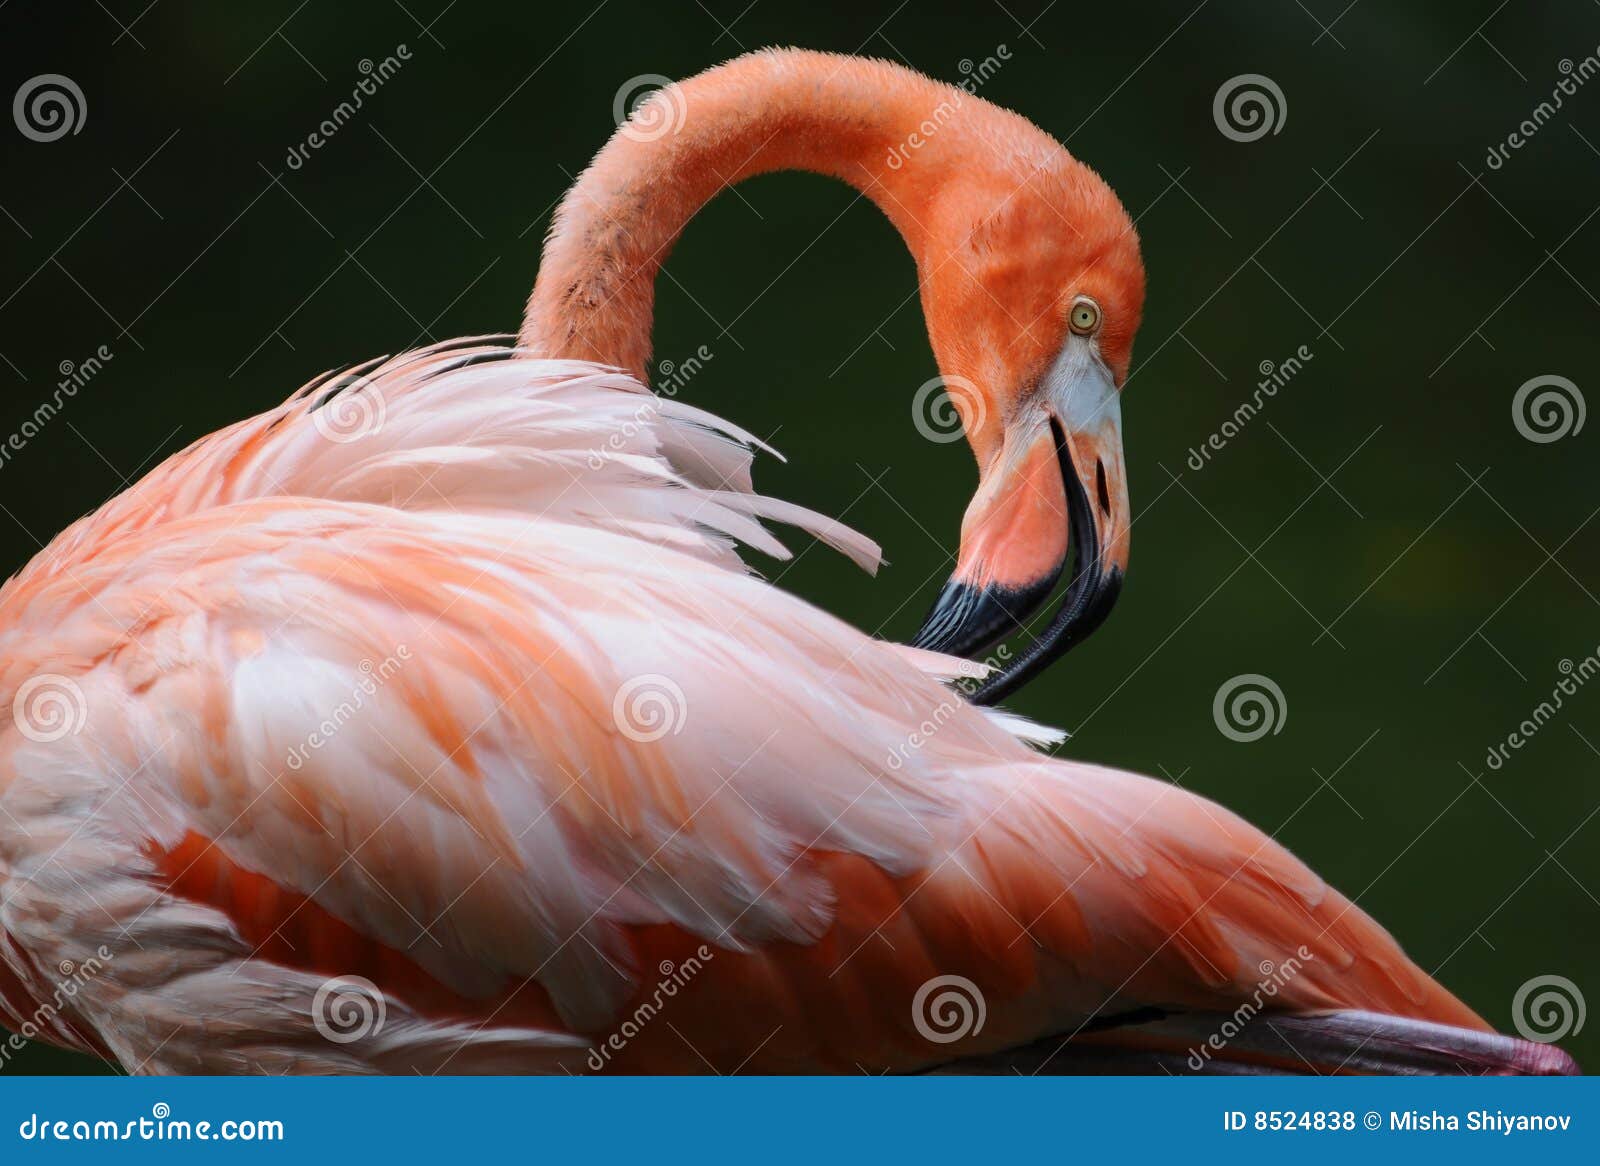 pink flamingo is cleaning its' feathers